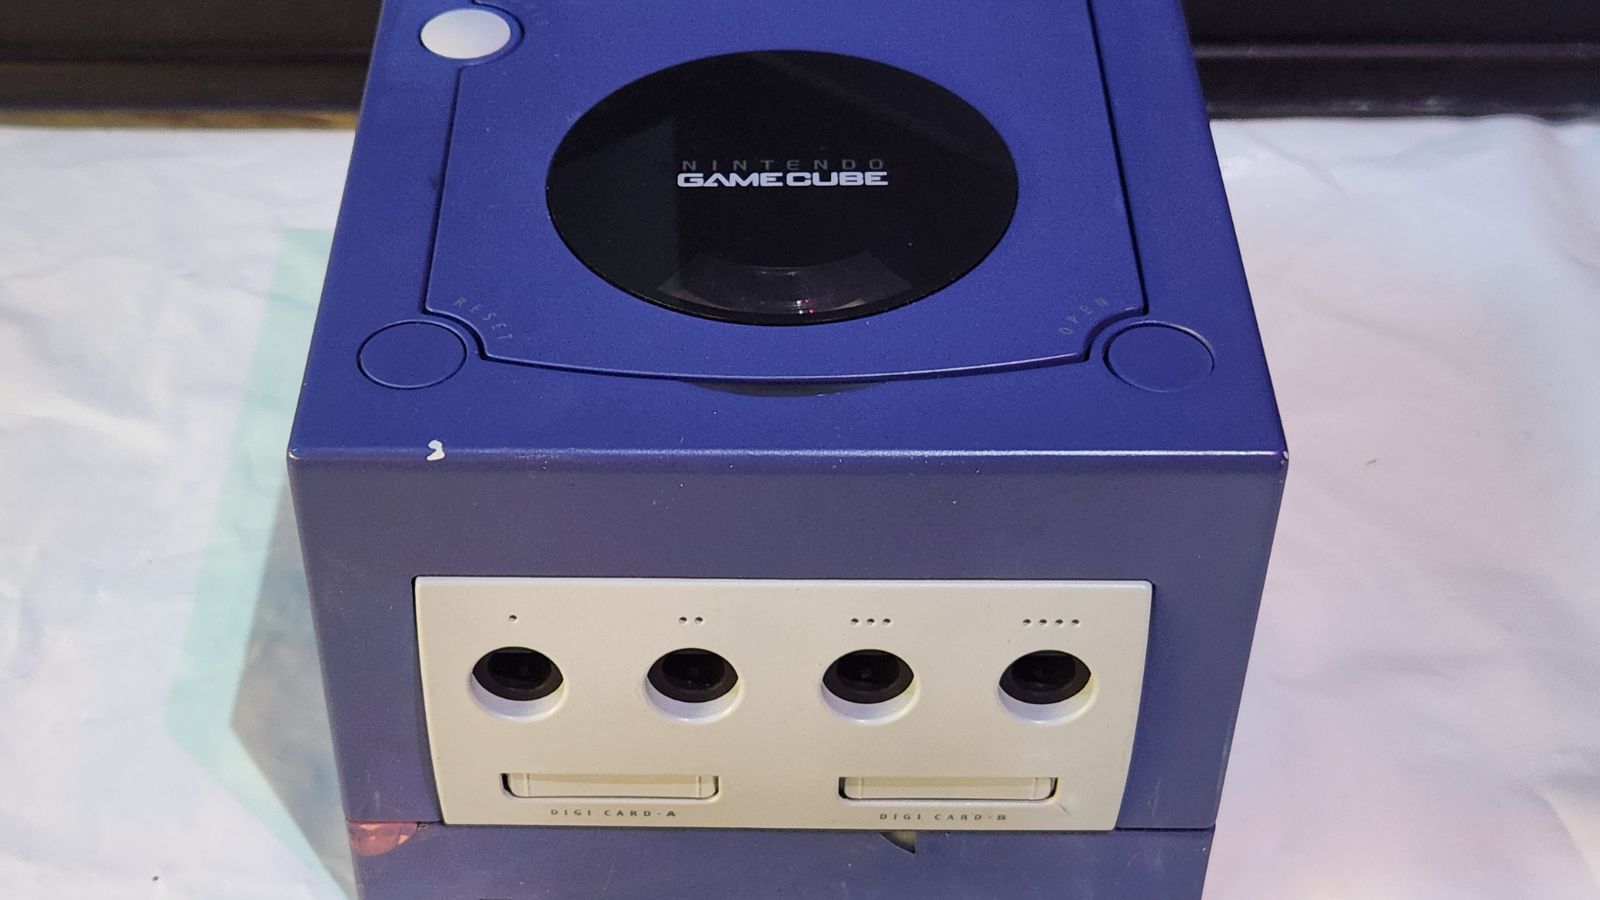 Collector finds incredibly rare GameCube prototype with one-of-a-kind controller – Dexerto